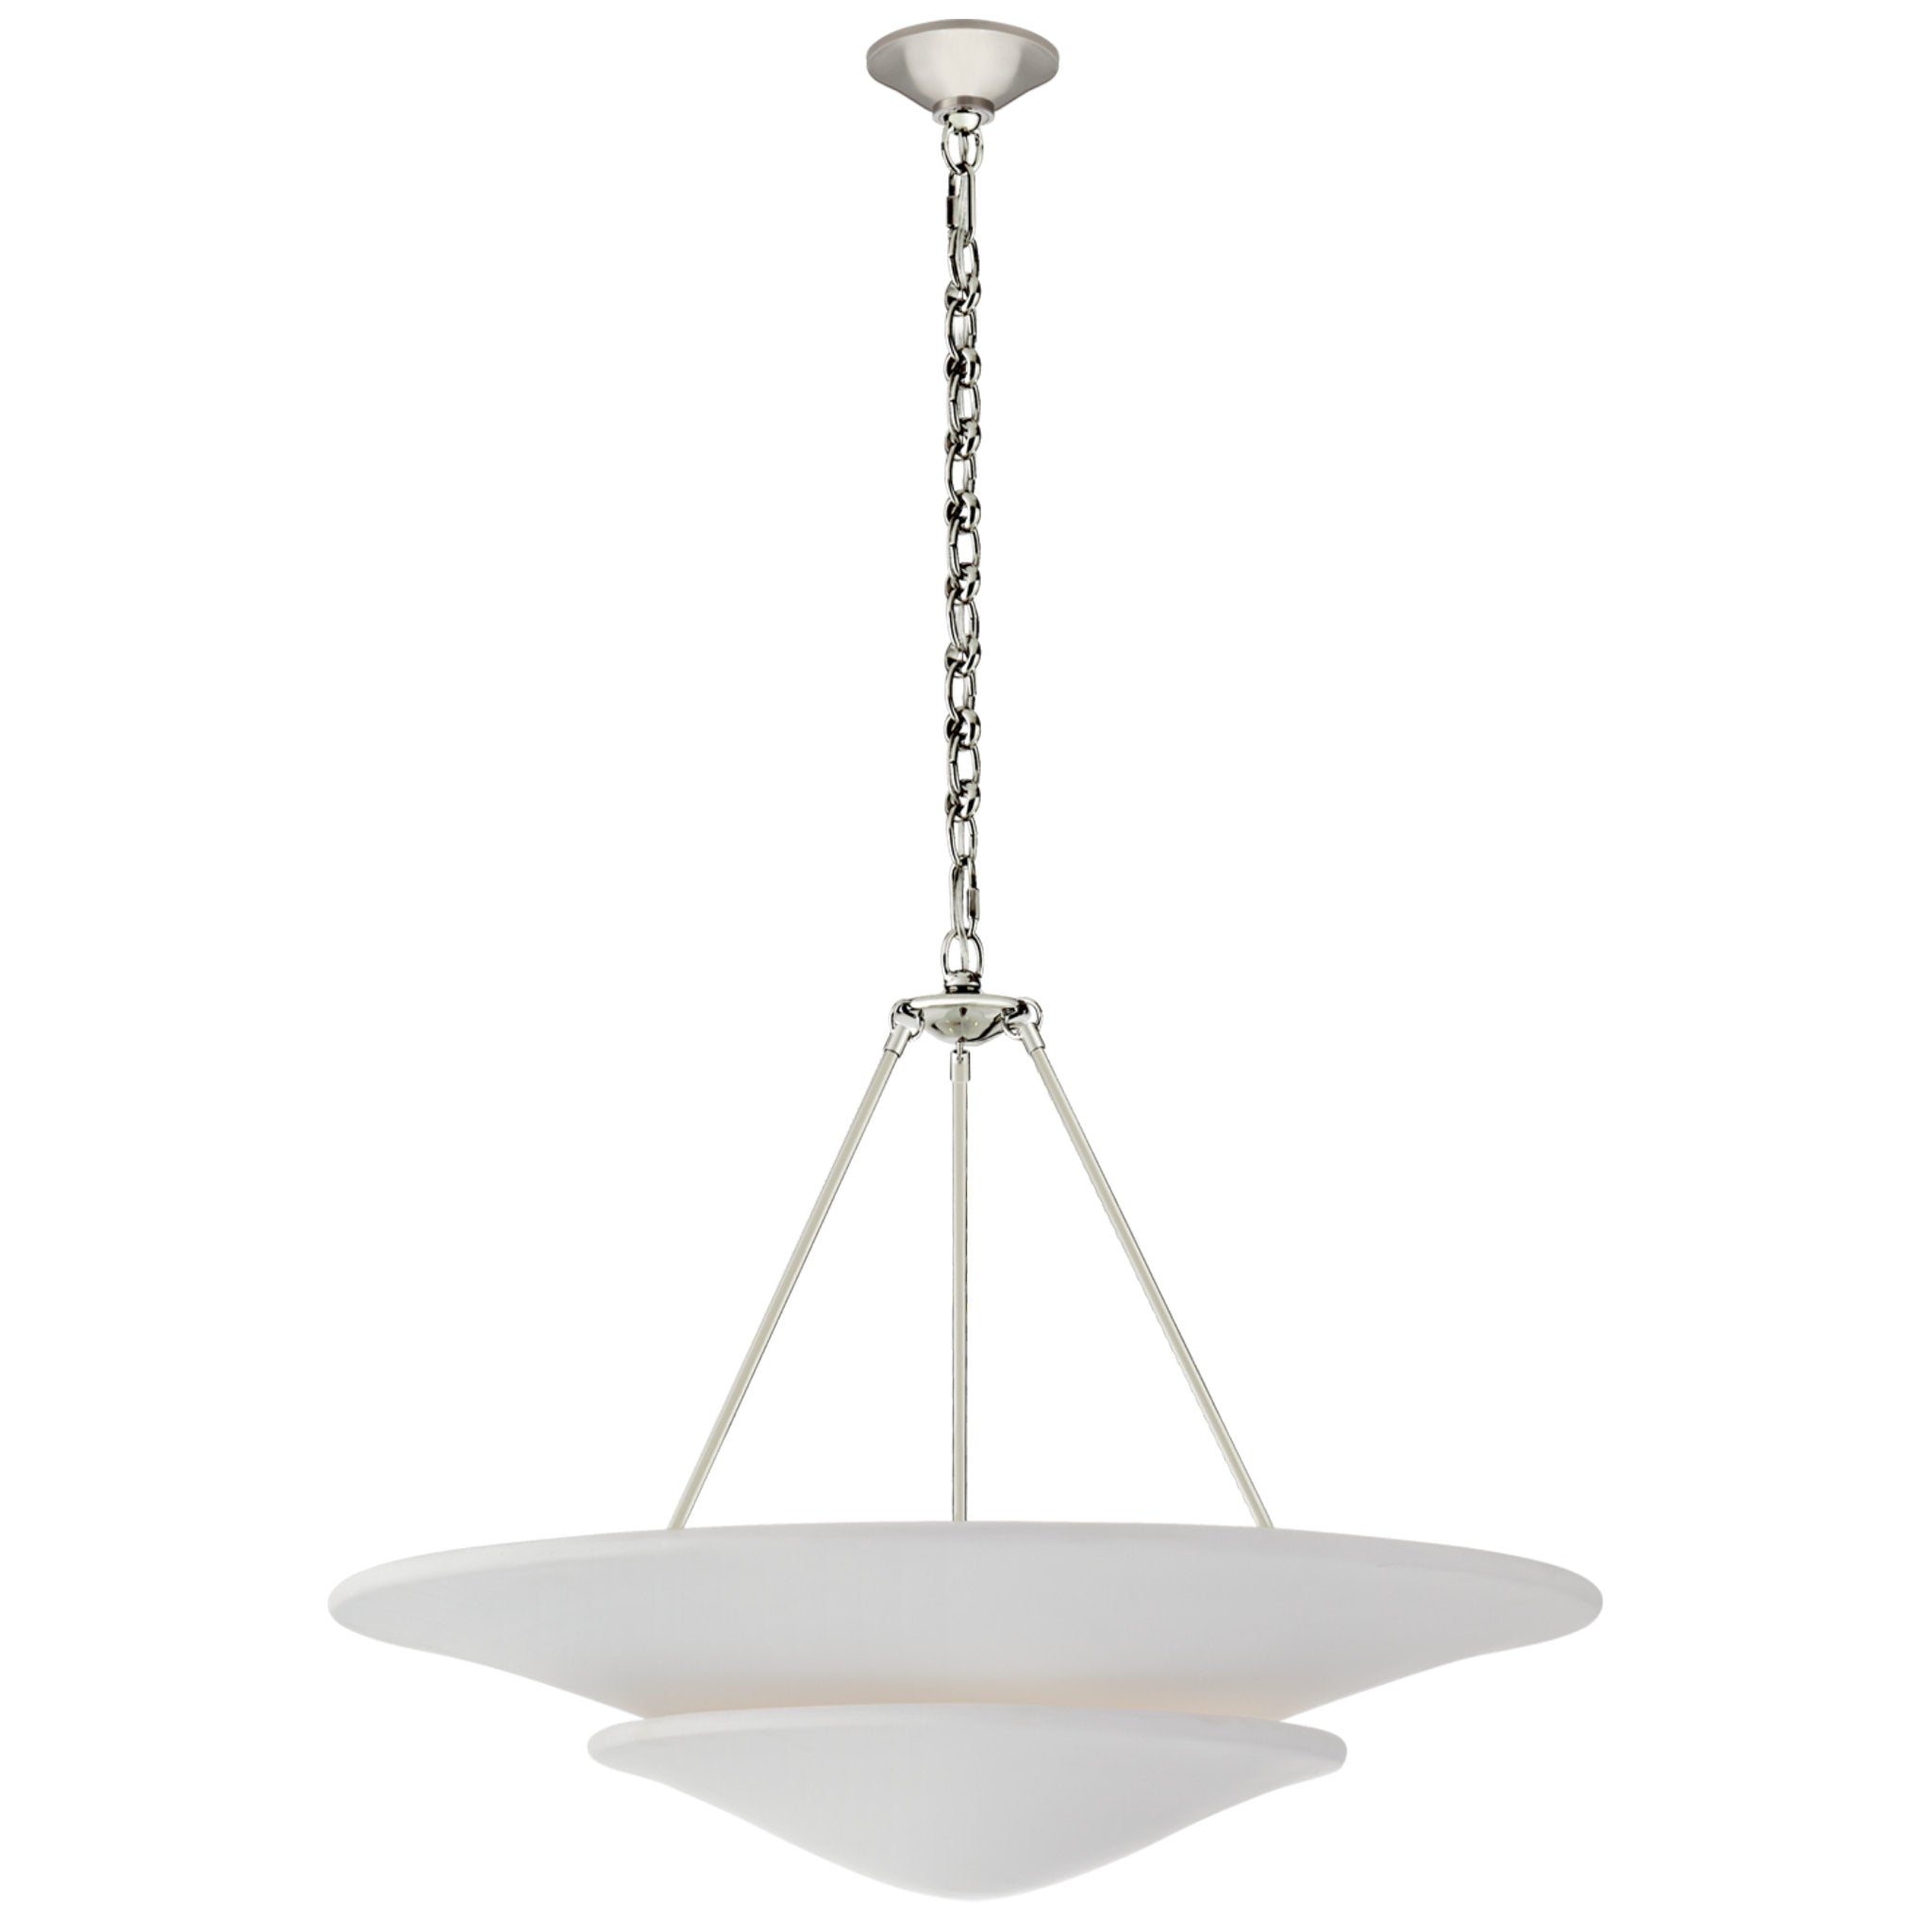 AERIN Mollino Large Tiered Chandelier in Polished Nickel with Plaster White Shade